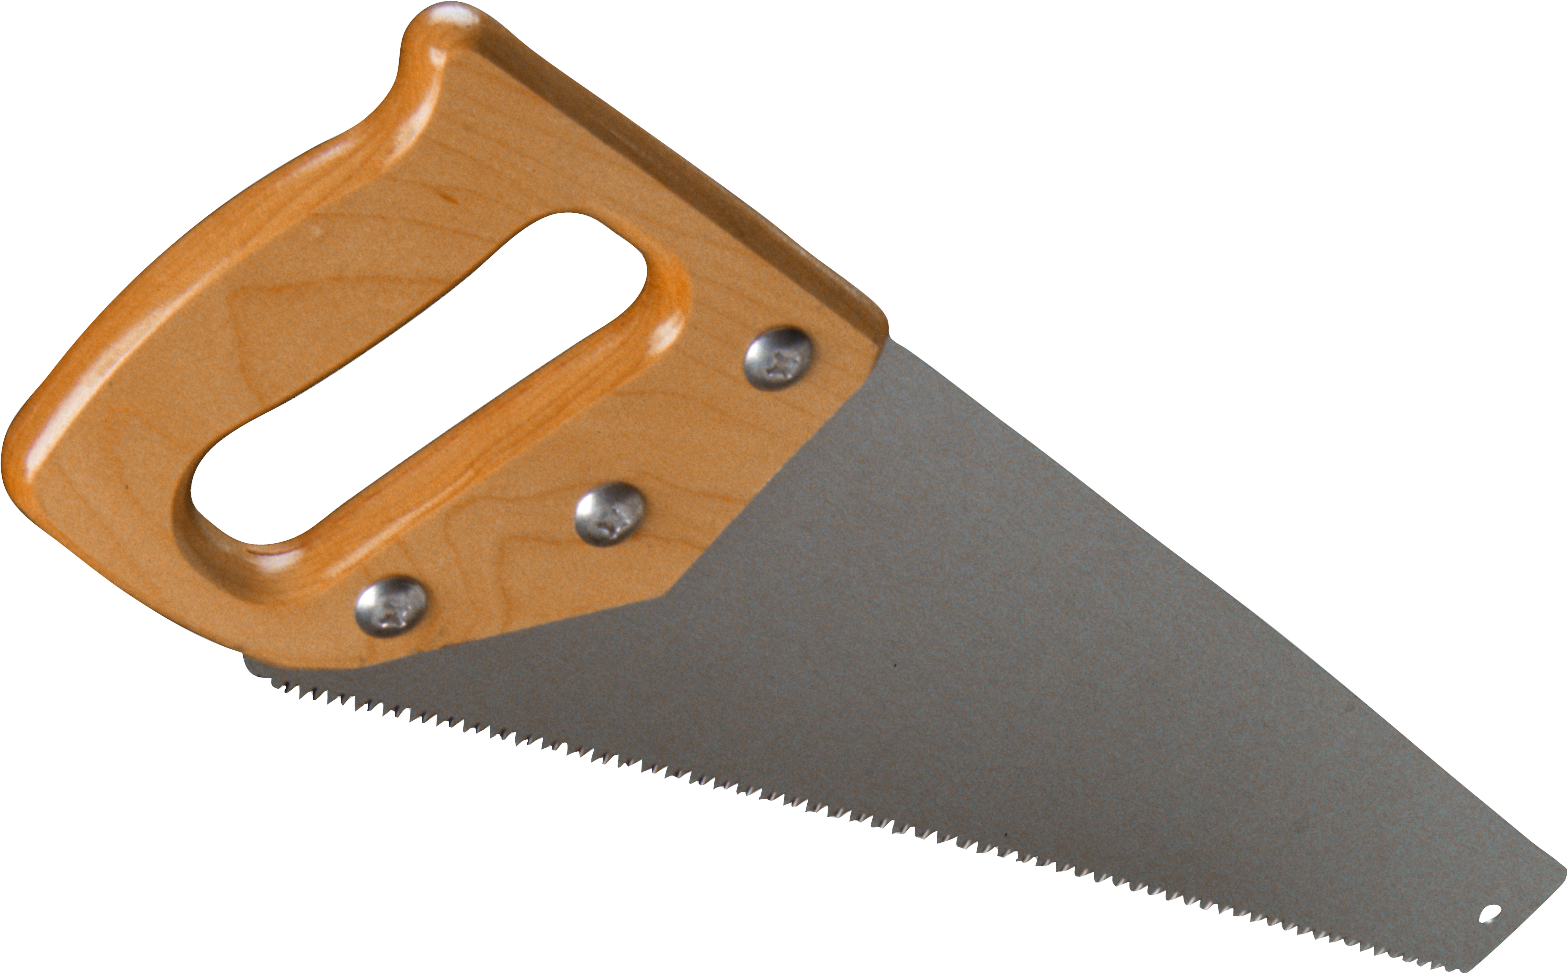 Hand saw PNG images Download 